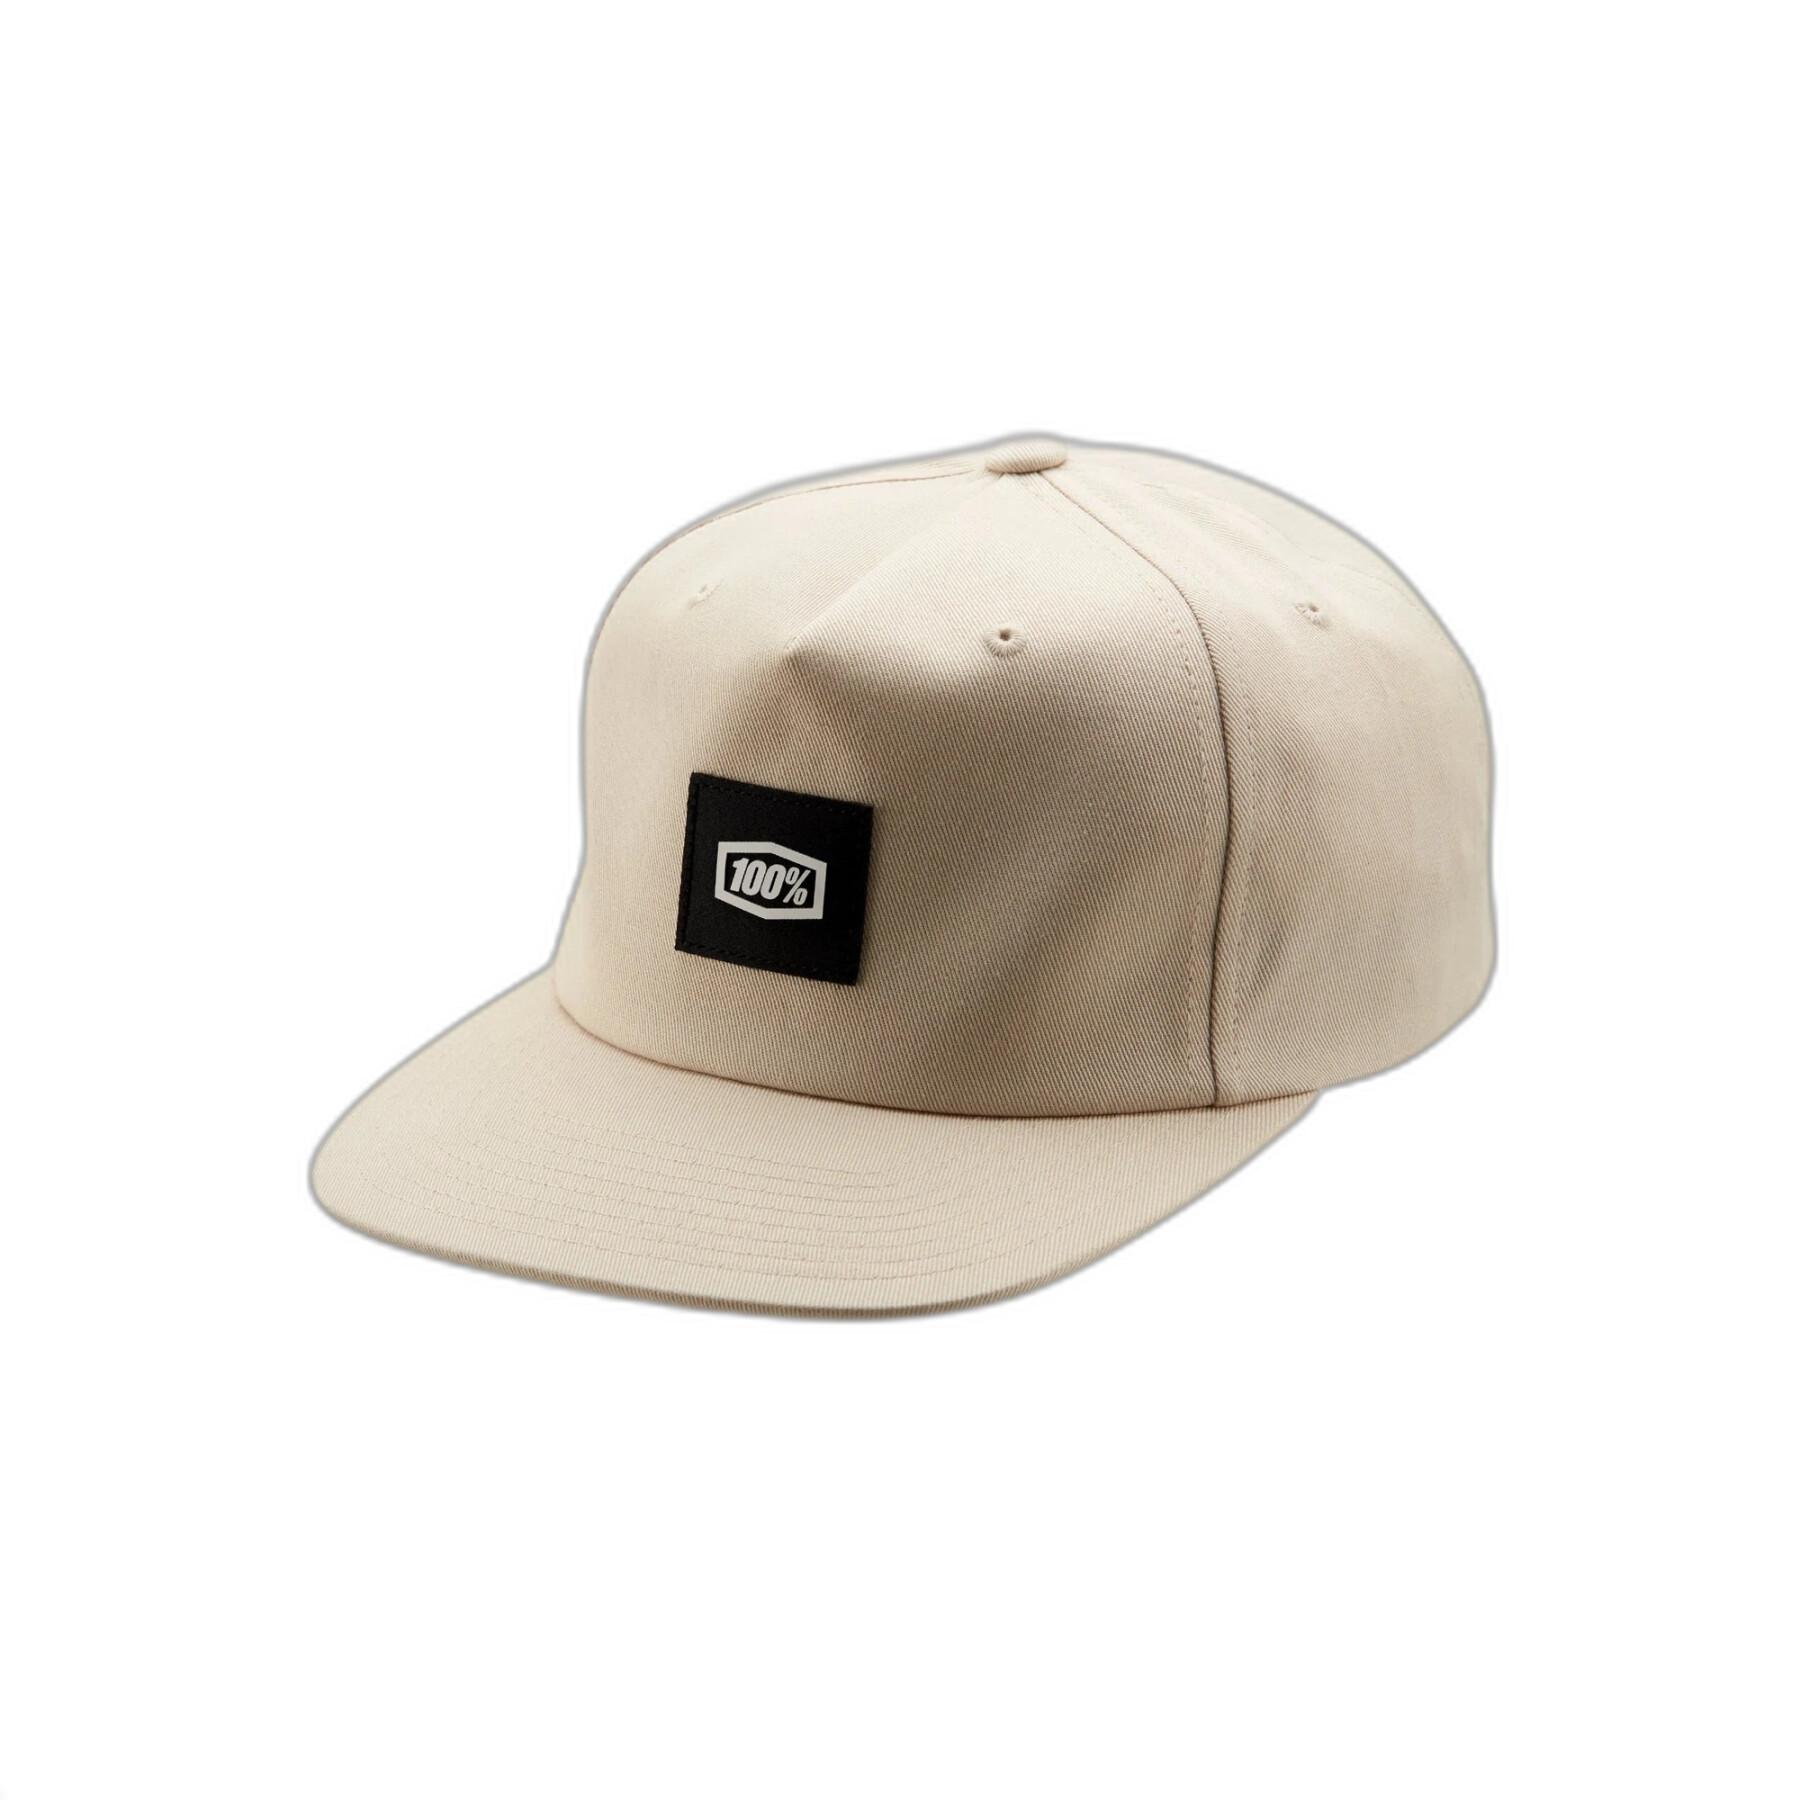 100% snapback-keps lincoln unstructured lyp fit